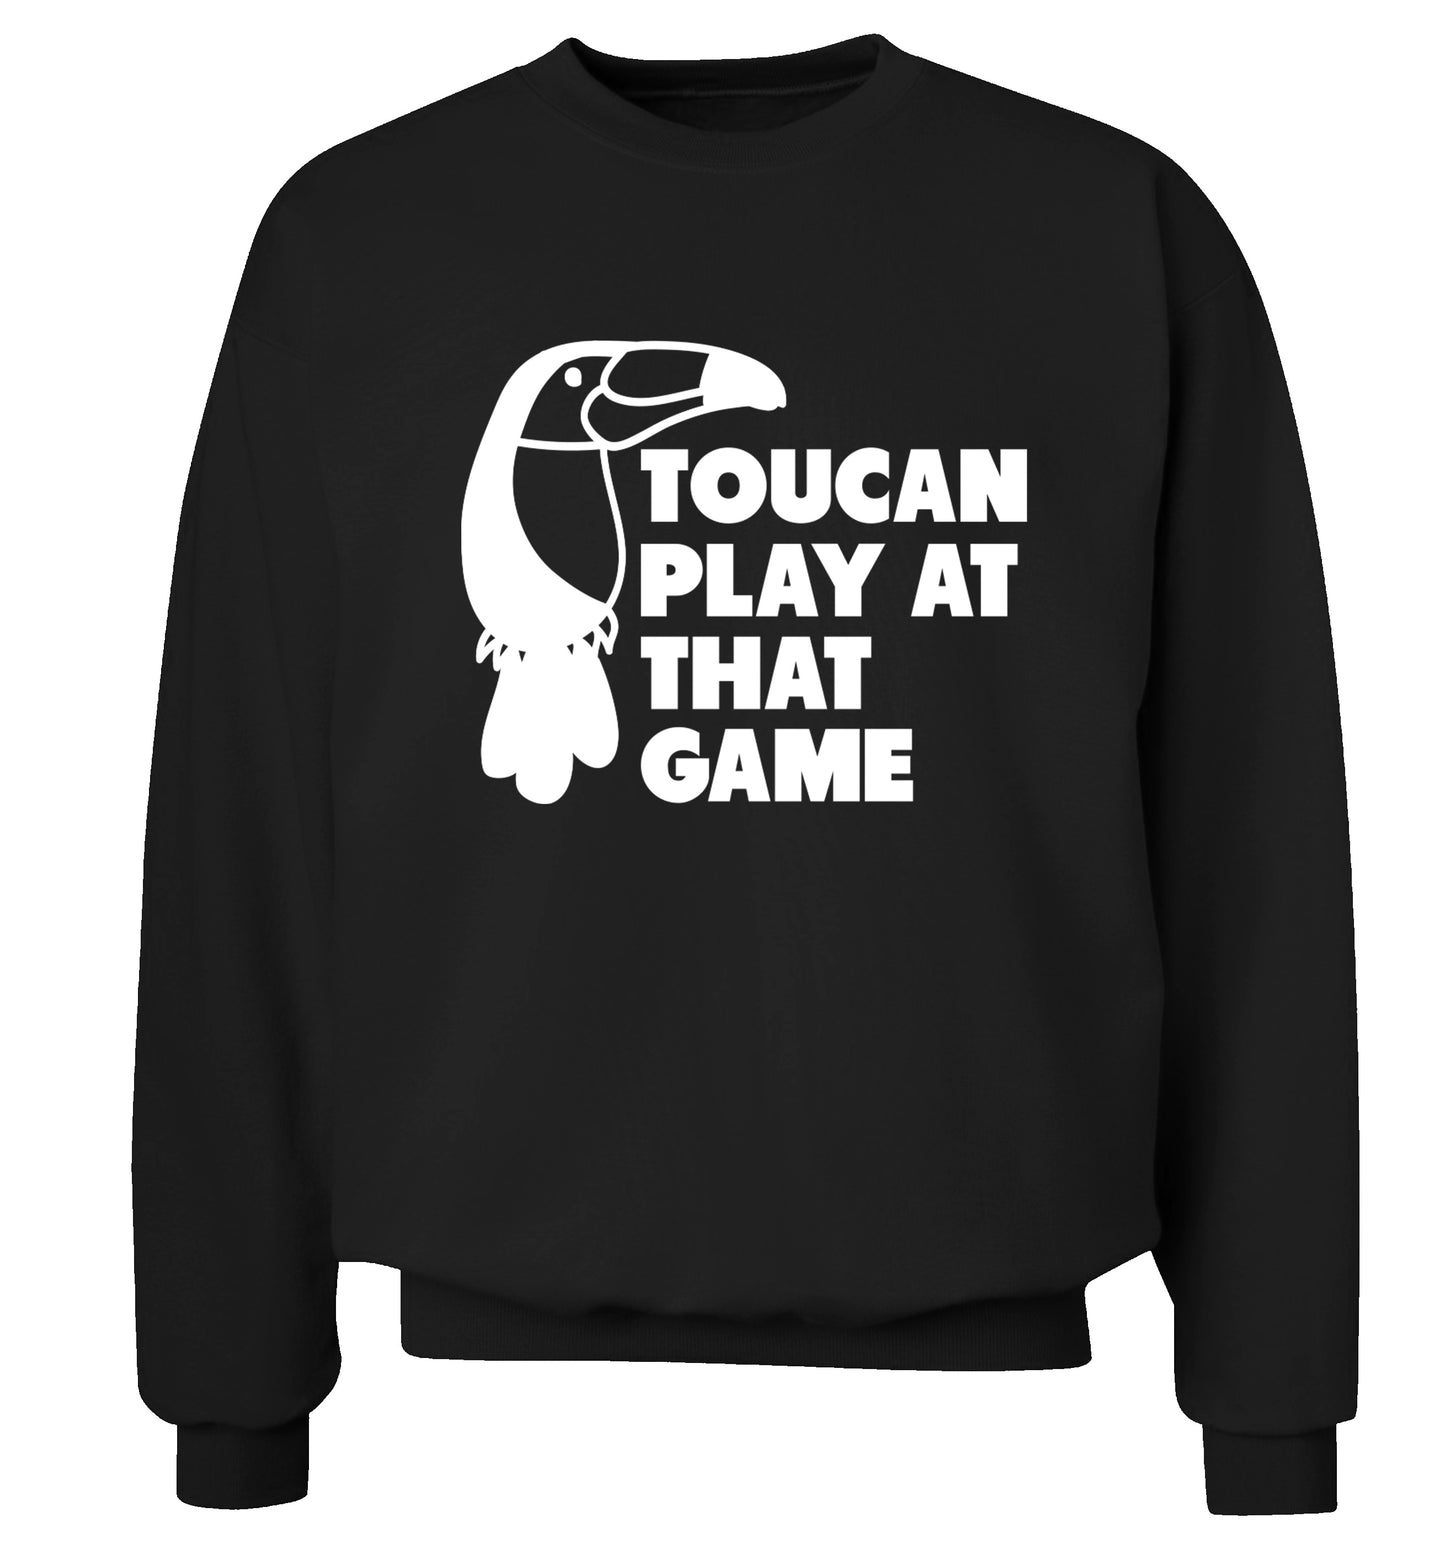 Toucan play at that game Adult's unisex black Sweater 2XL